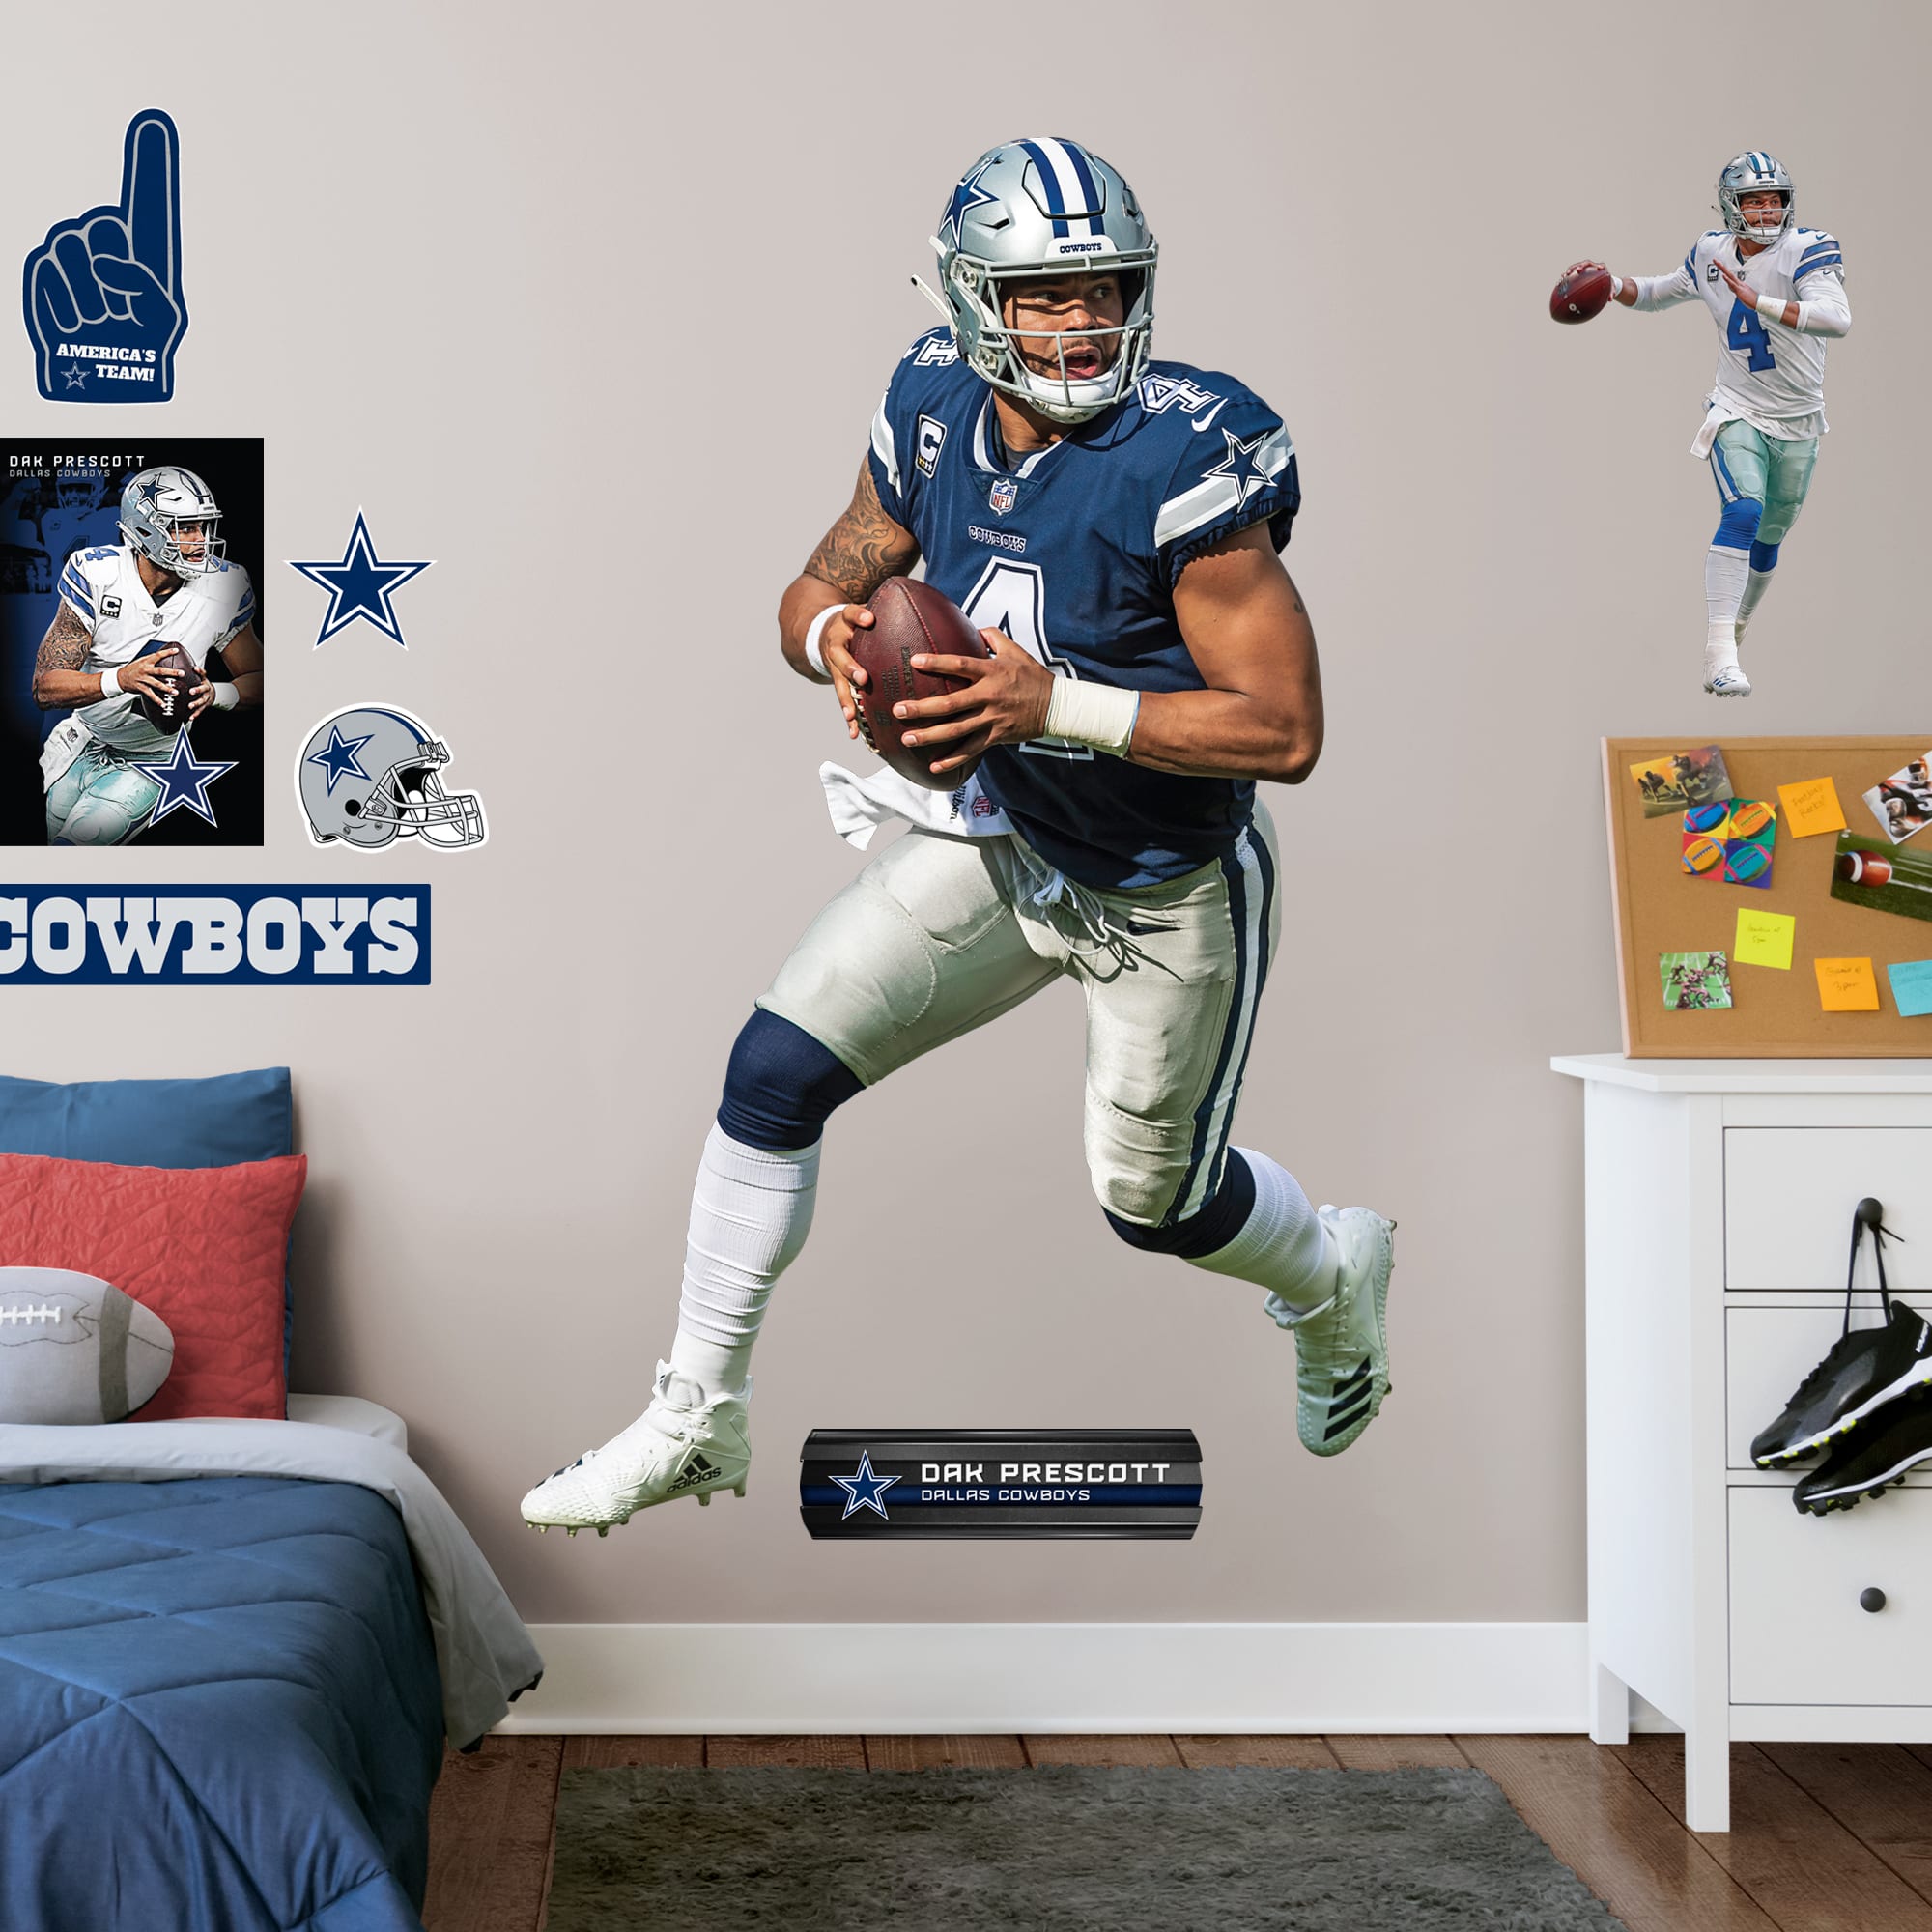 Dak Prescott for Dallas Cowboys: Away - Officially Licensed NFL Removable Wall Decal Life-Size Athlete + 10 Decals (48"W x 78"H)